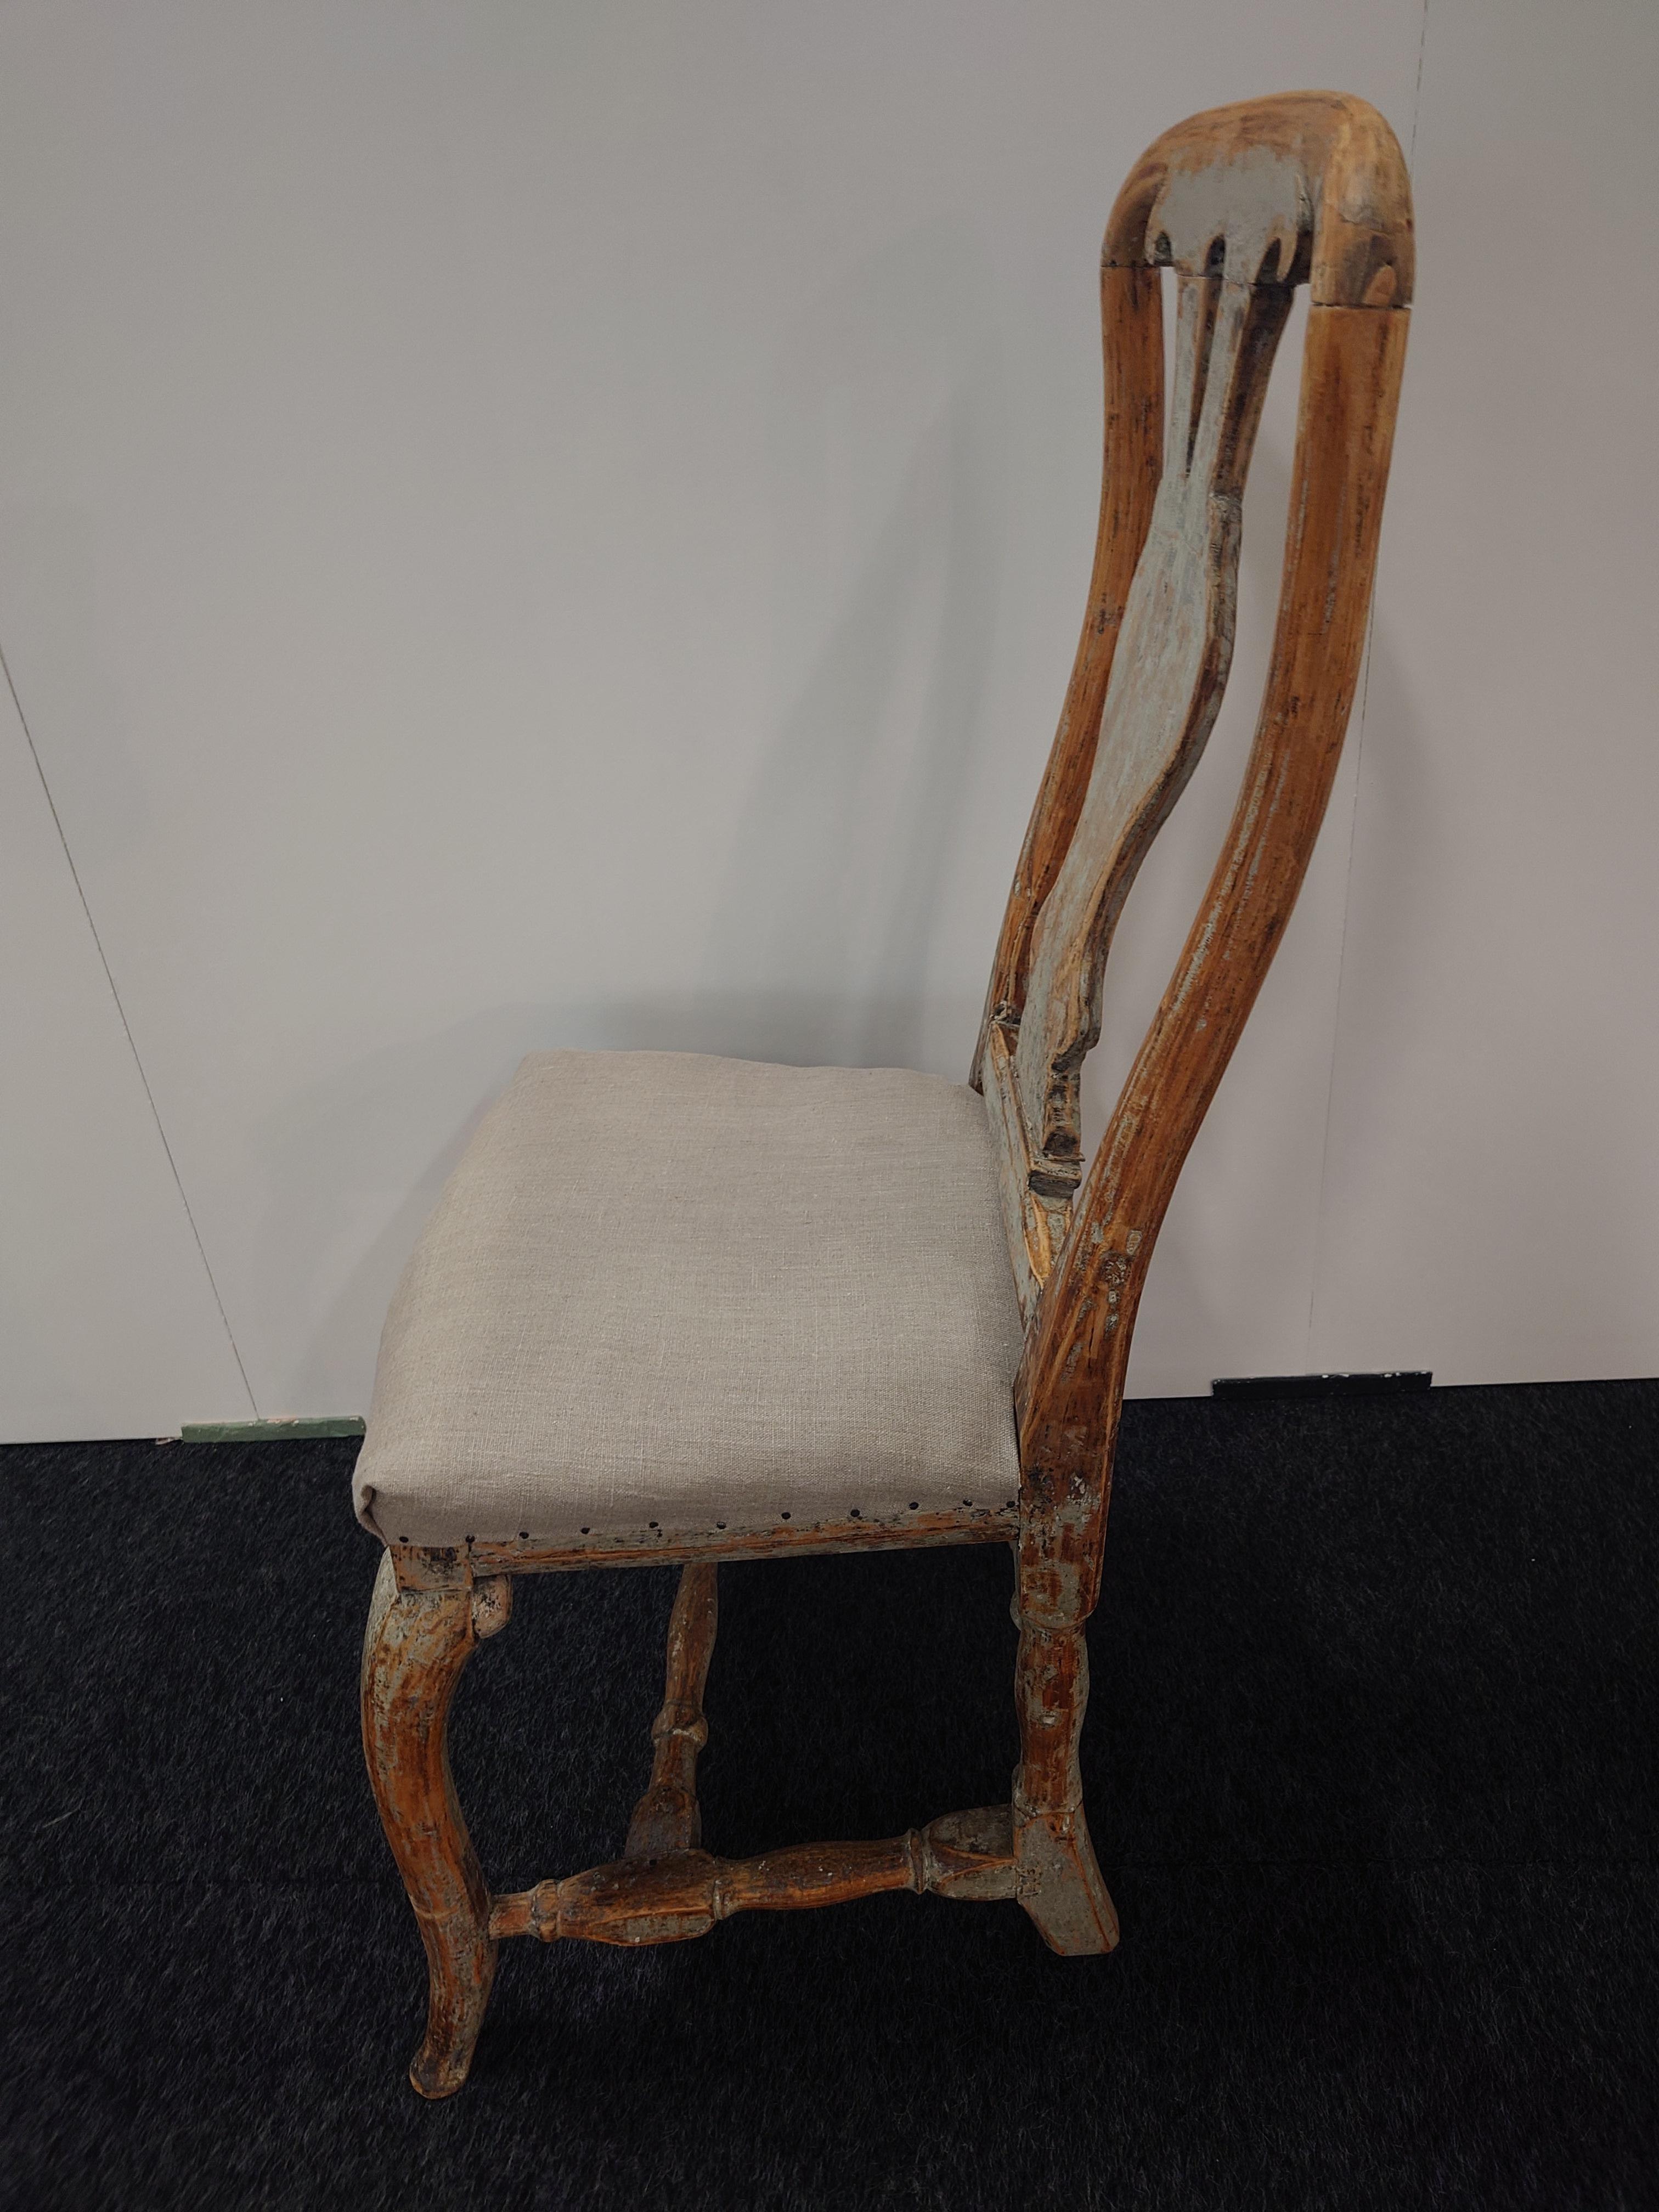 Hand-Carved 18th Century Swedish Late Baroque Chair Umeå, Northern Sweden For Sale